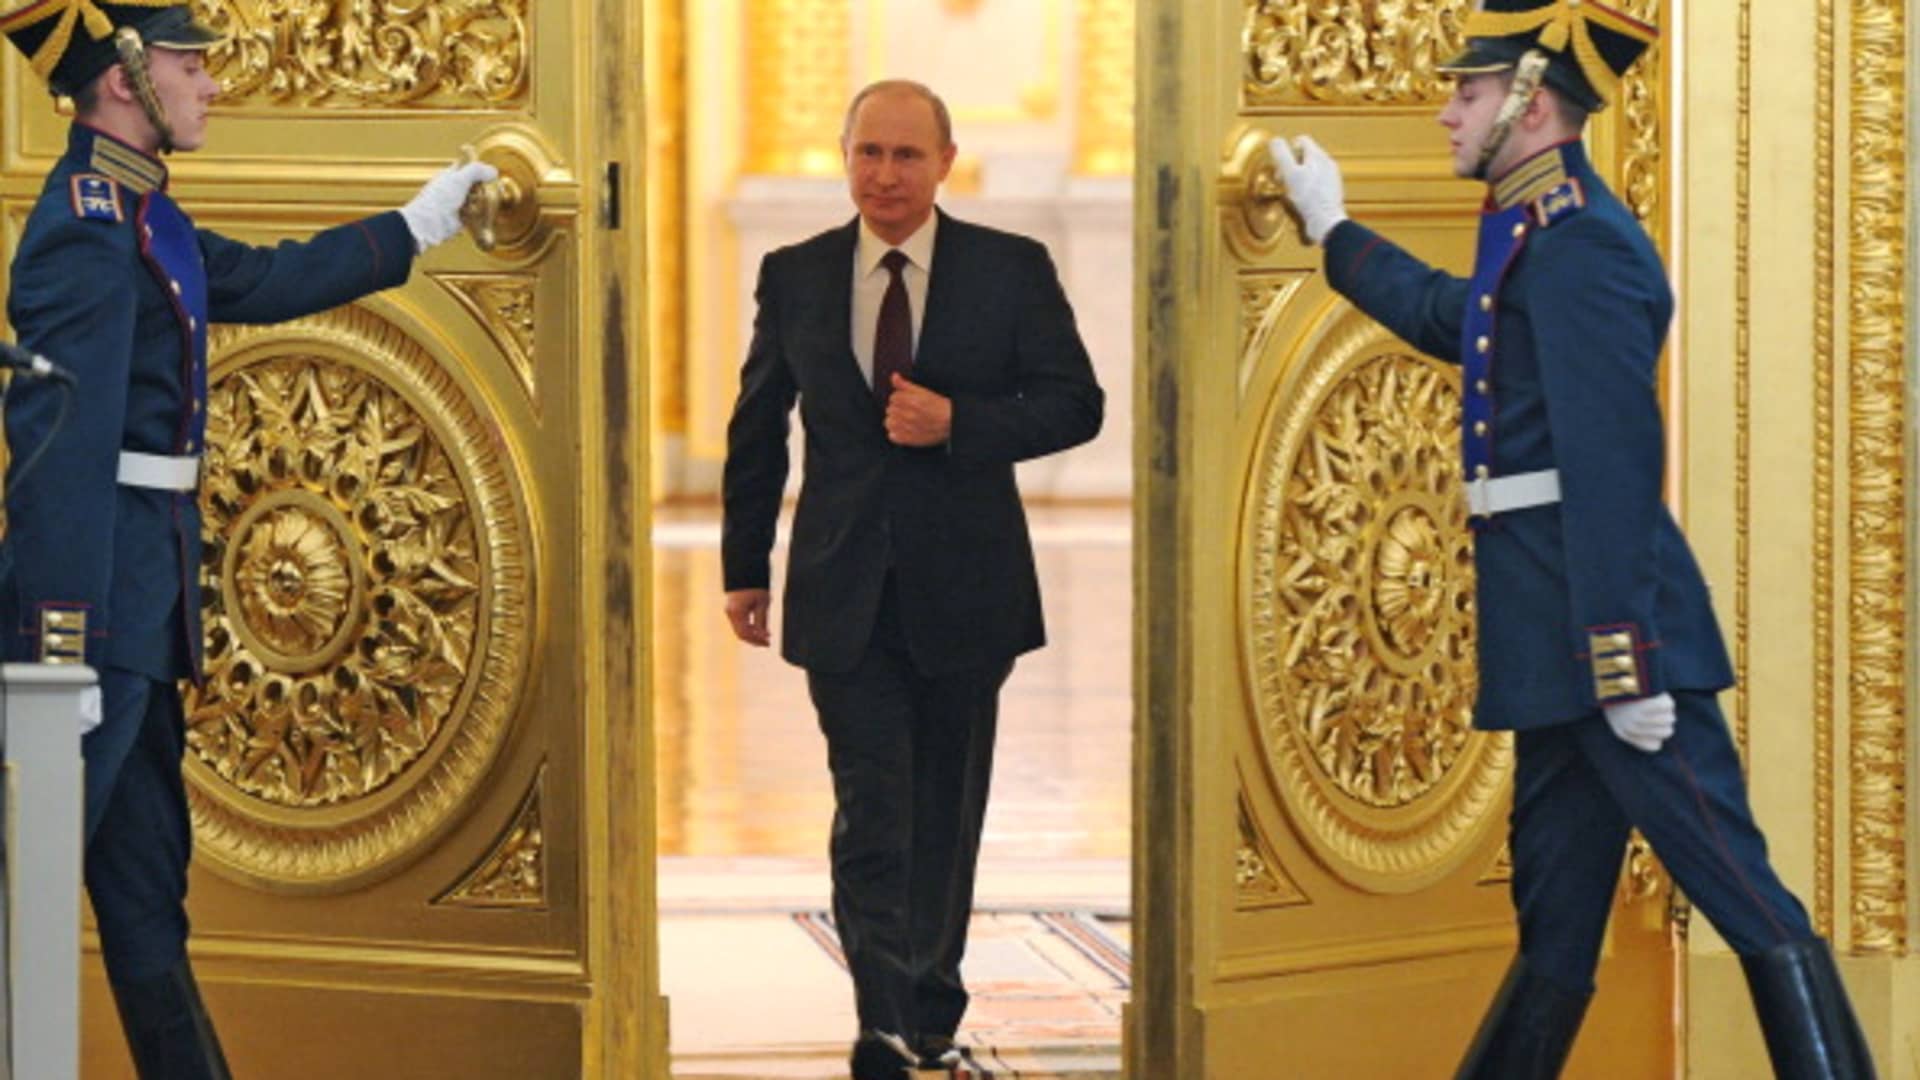 Russian President Vladimir Putin enters the St. George Hall at the Grand Kremlin Palace in Moscow.